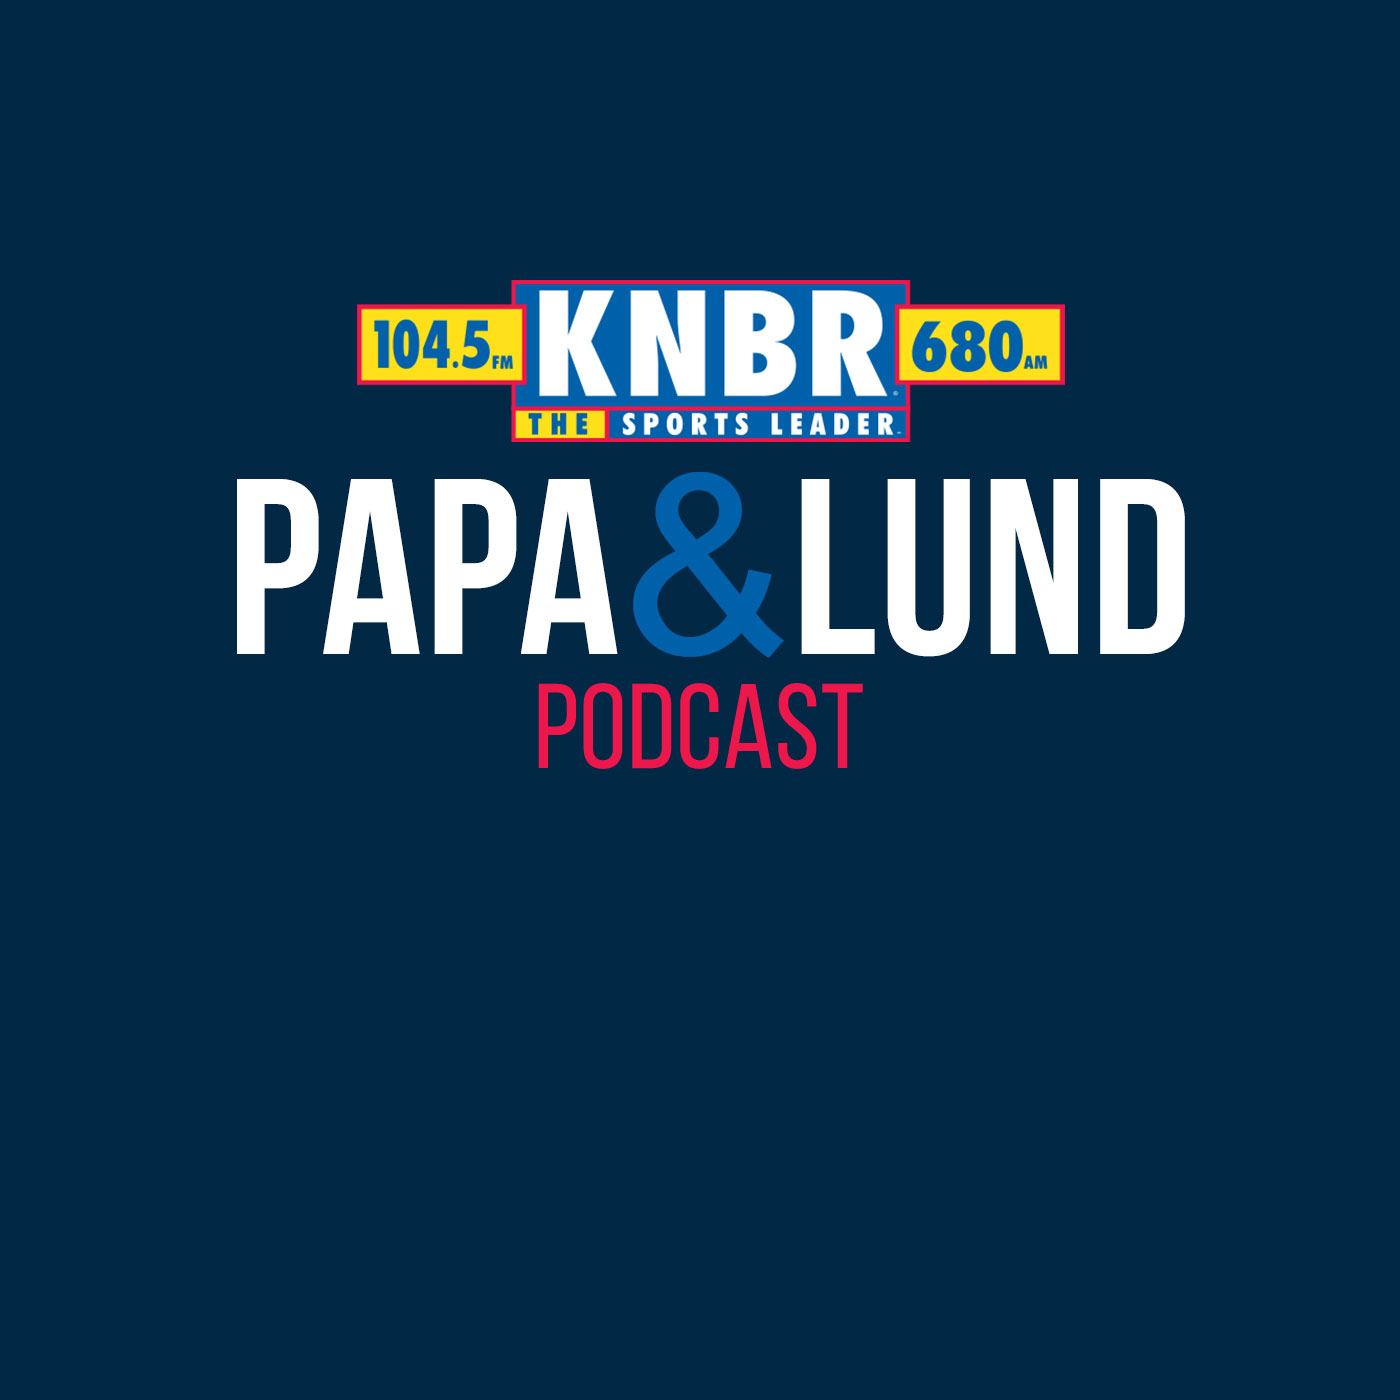 7-1 Tony La Russa joins Papa & Lund as the White Sox are in town and discusses the differences from managing in todays game in the information era versus when he began managing with the White Sox 40 years ago